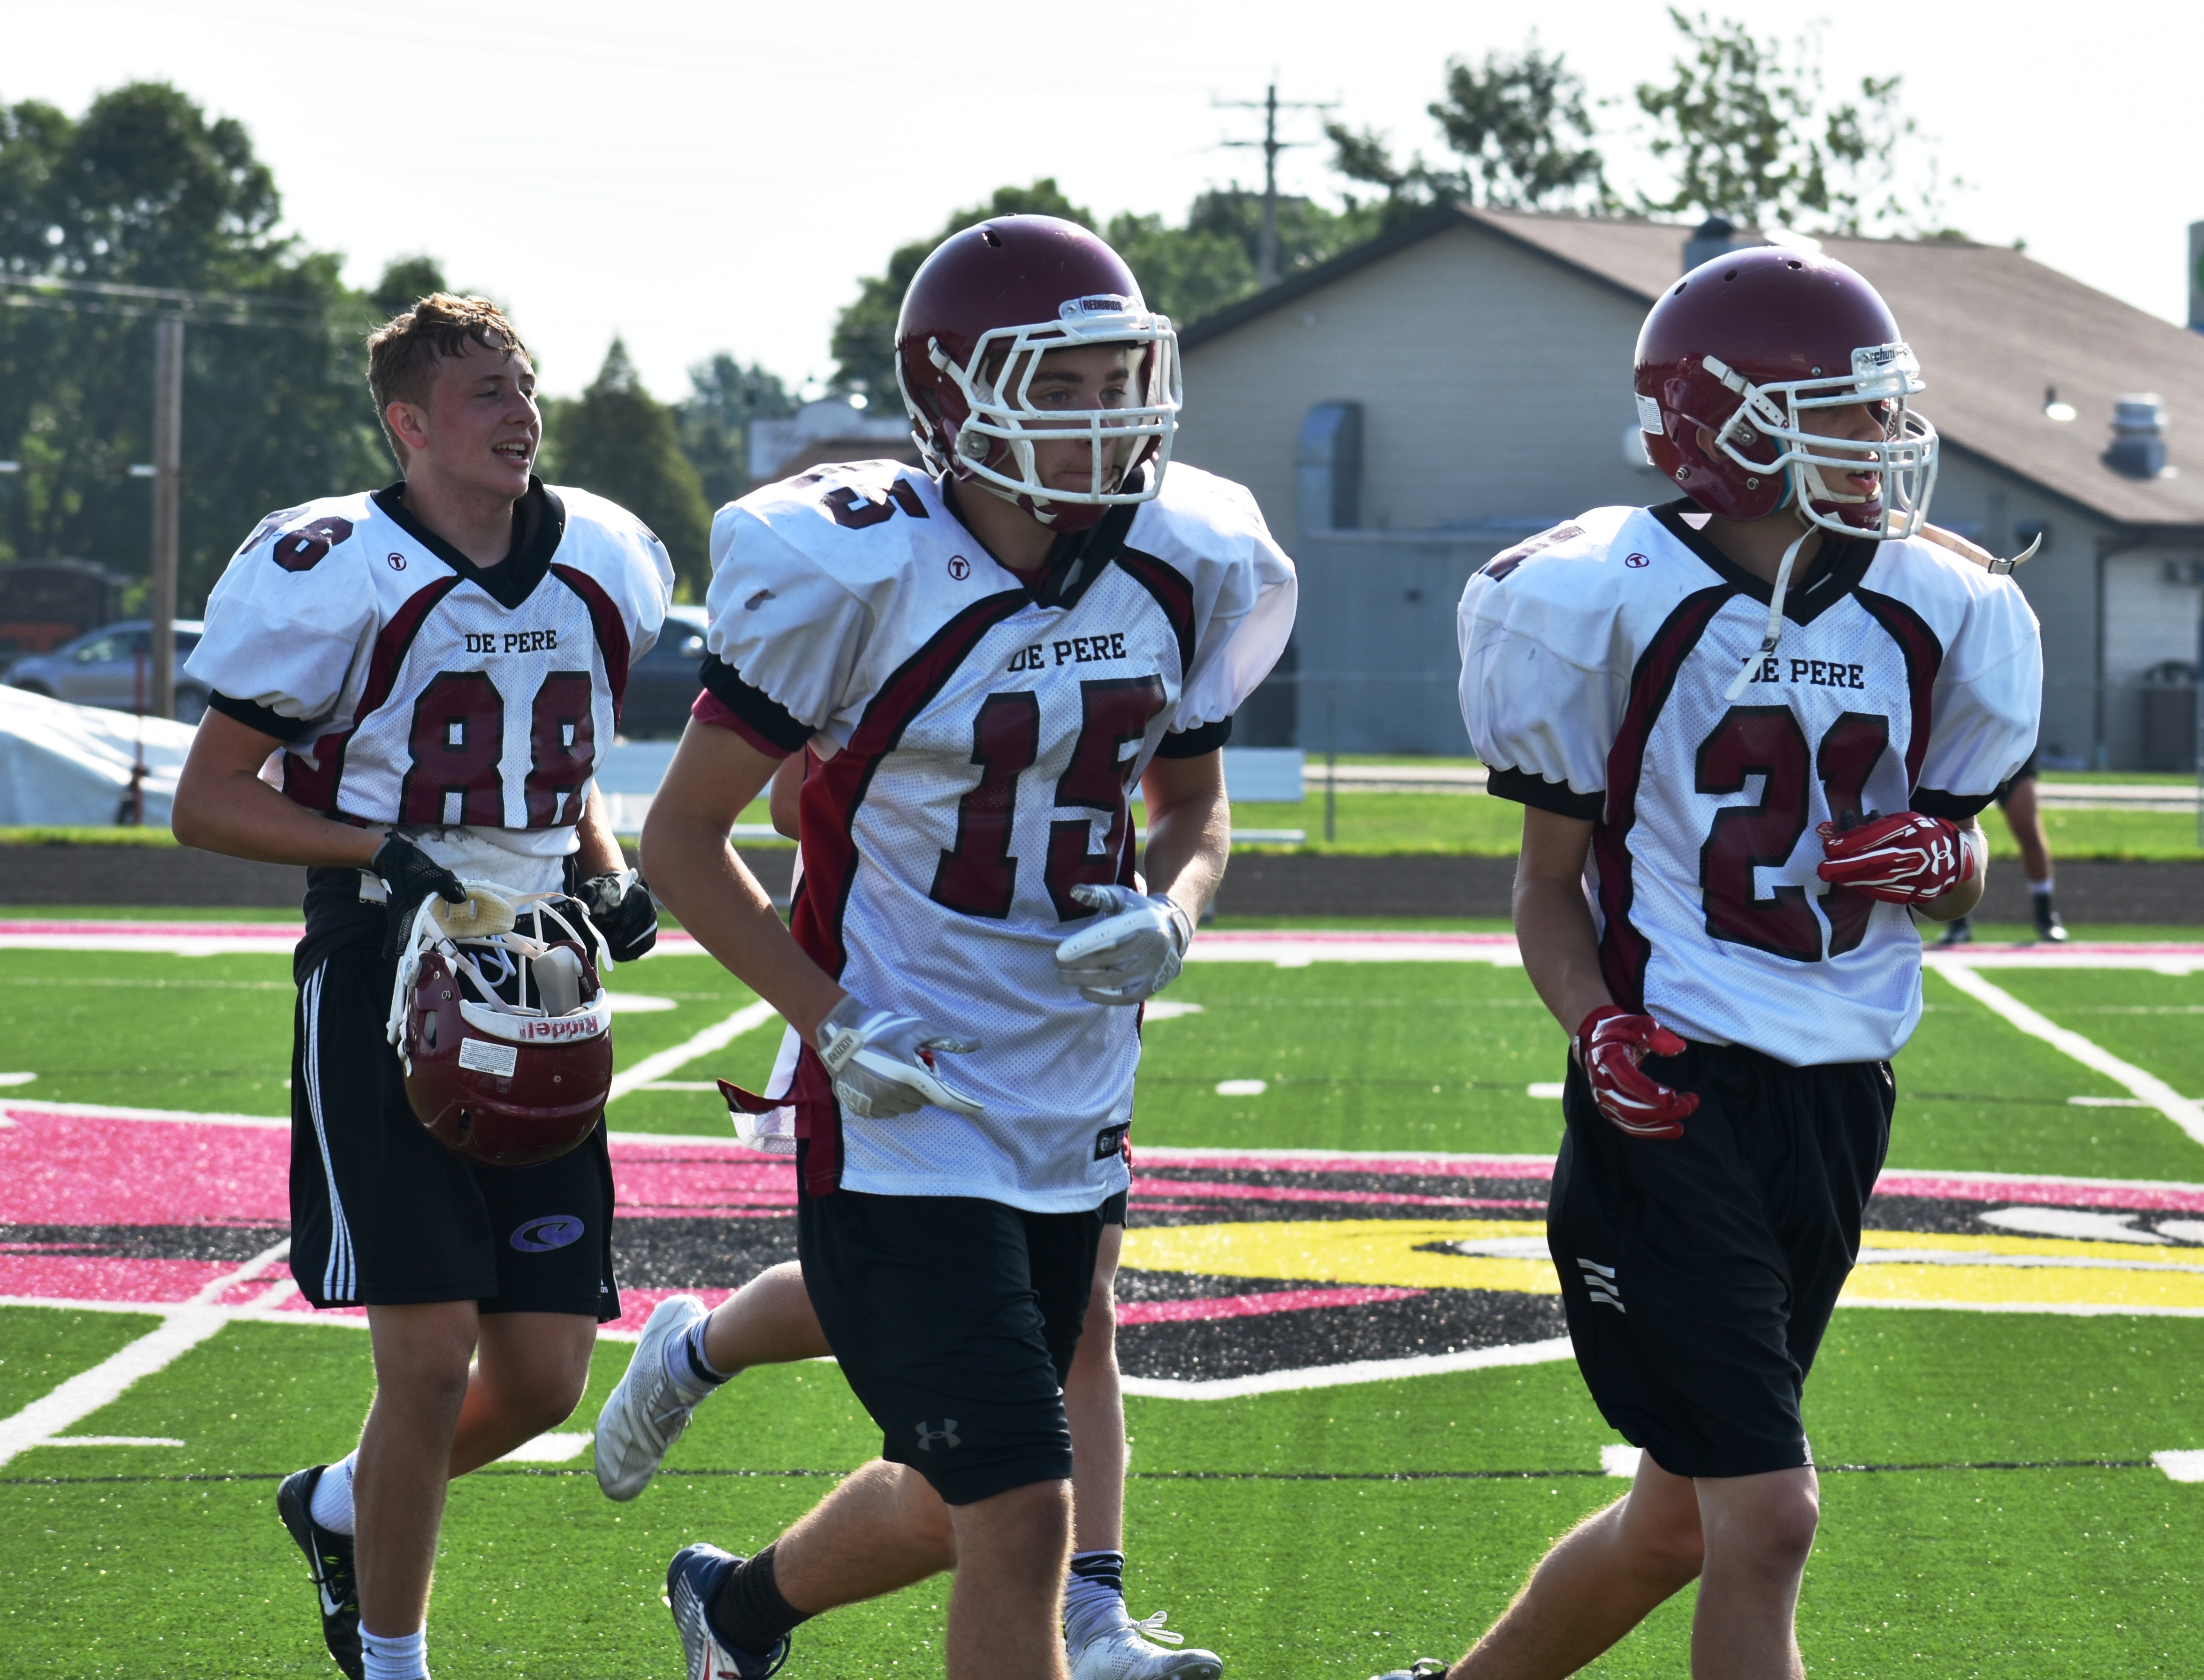 Looking to rebound: De Pere football preview